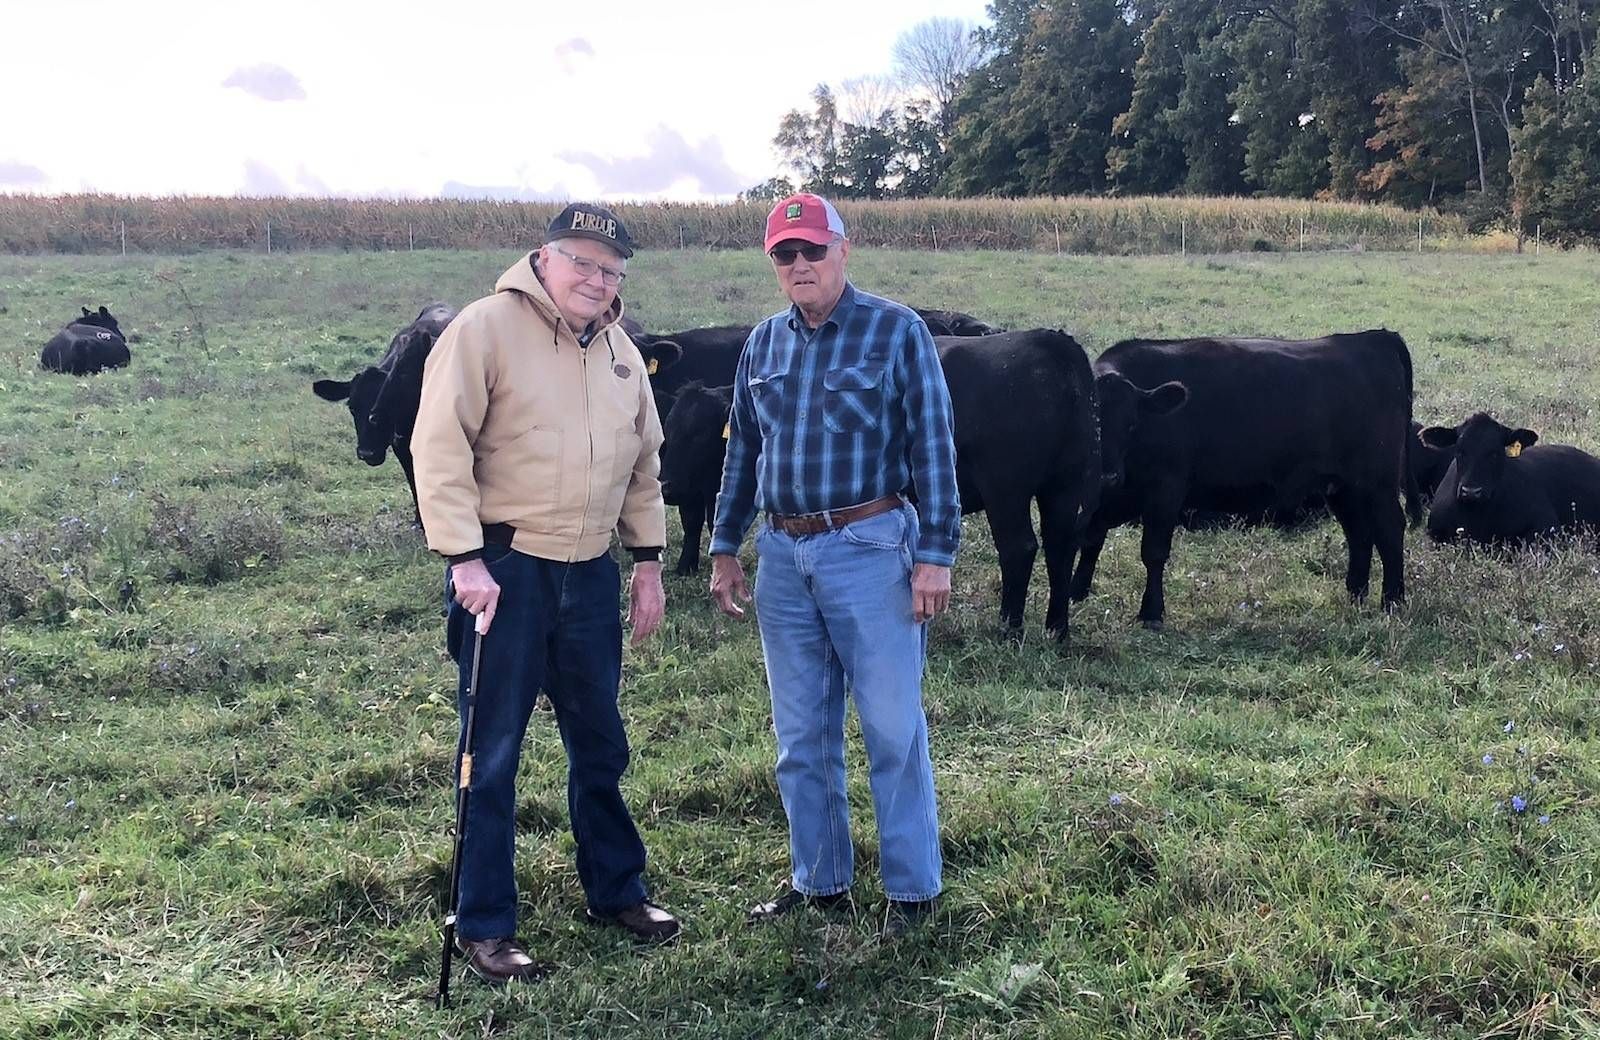 William McVay visits his friend Charley Robinson at his farm in Mulberry, Indiana